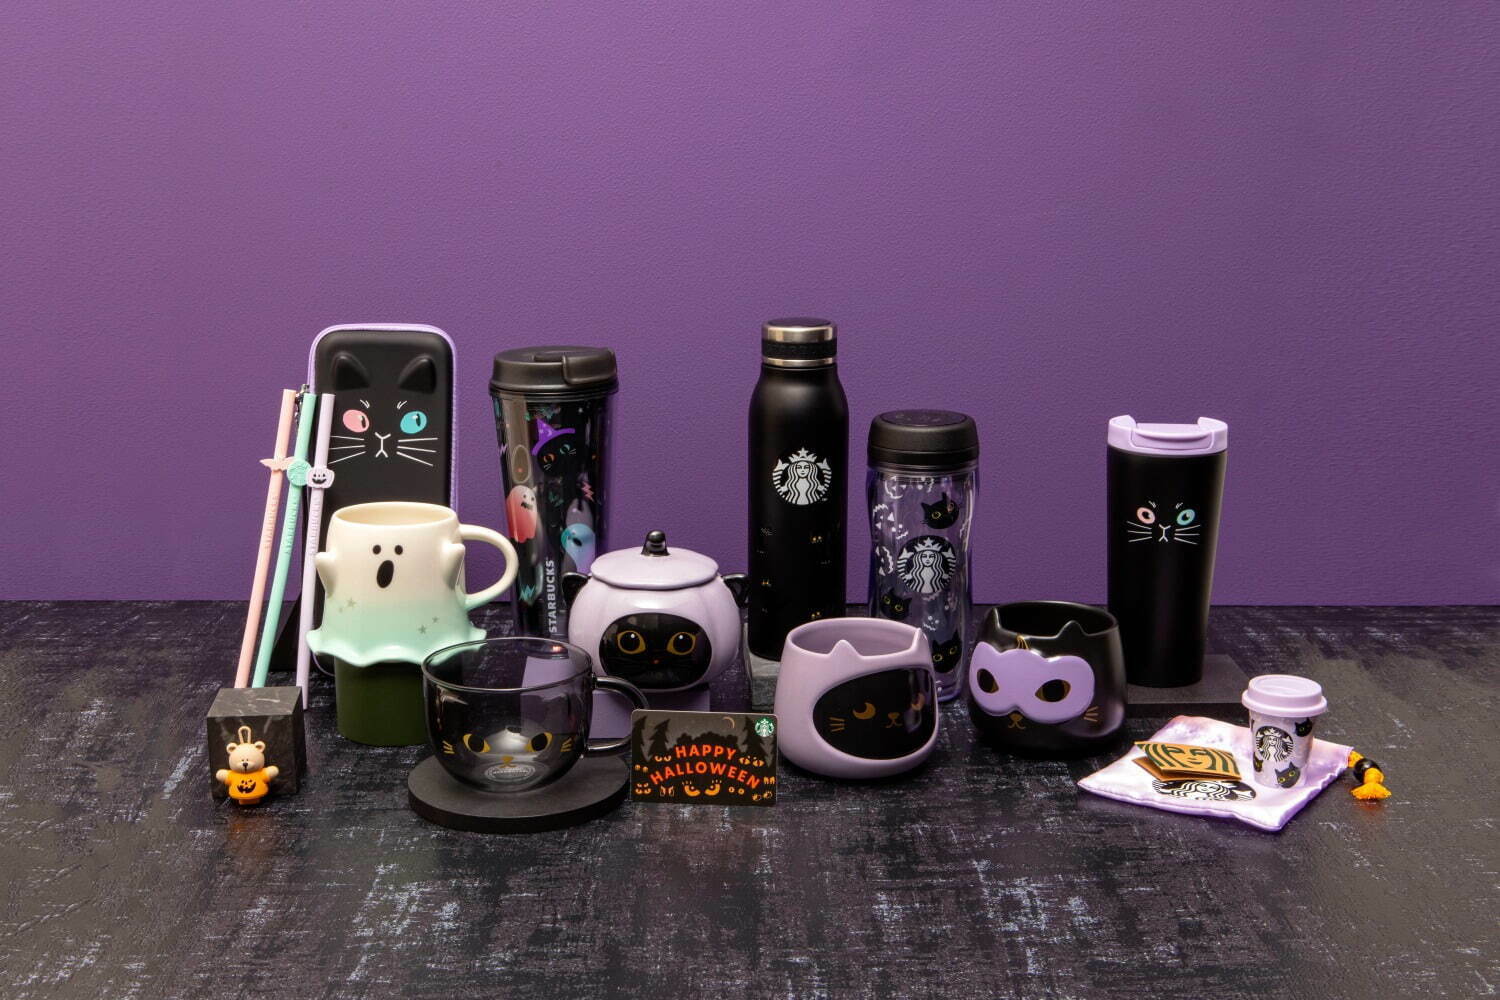 Starbucks has released an exclusive Japanonly Halloween collection